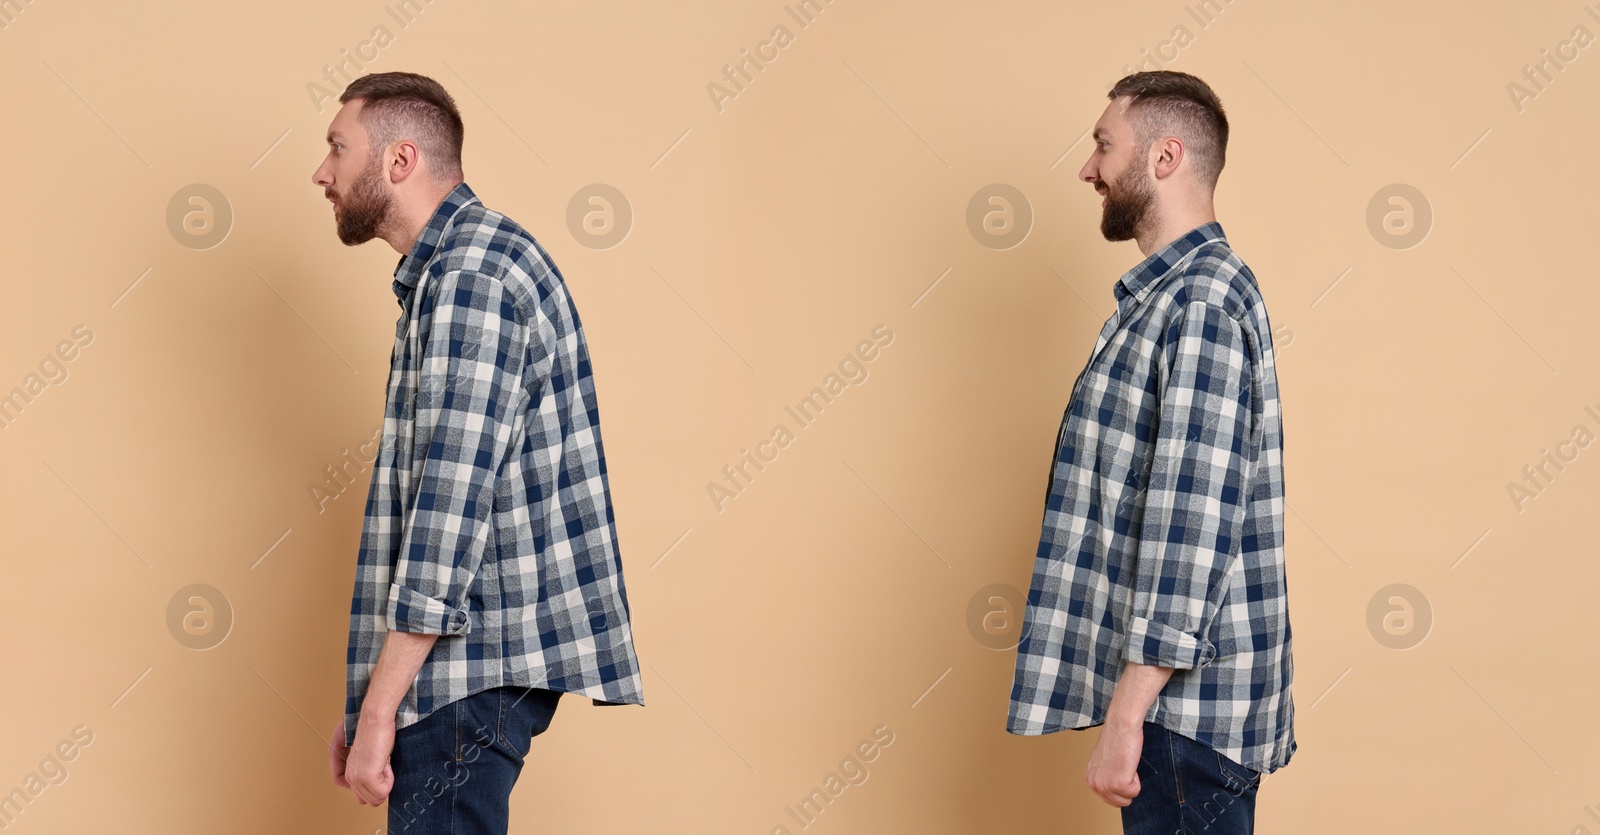 Image of Man with poor and good posture on beige background. Collage of photos